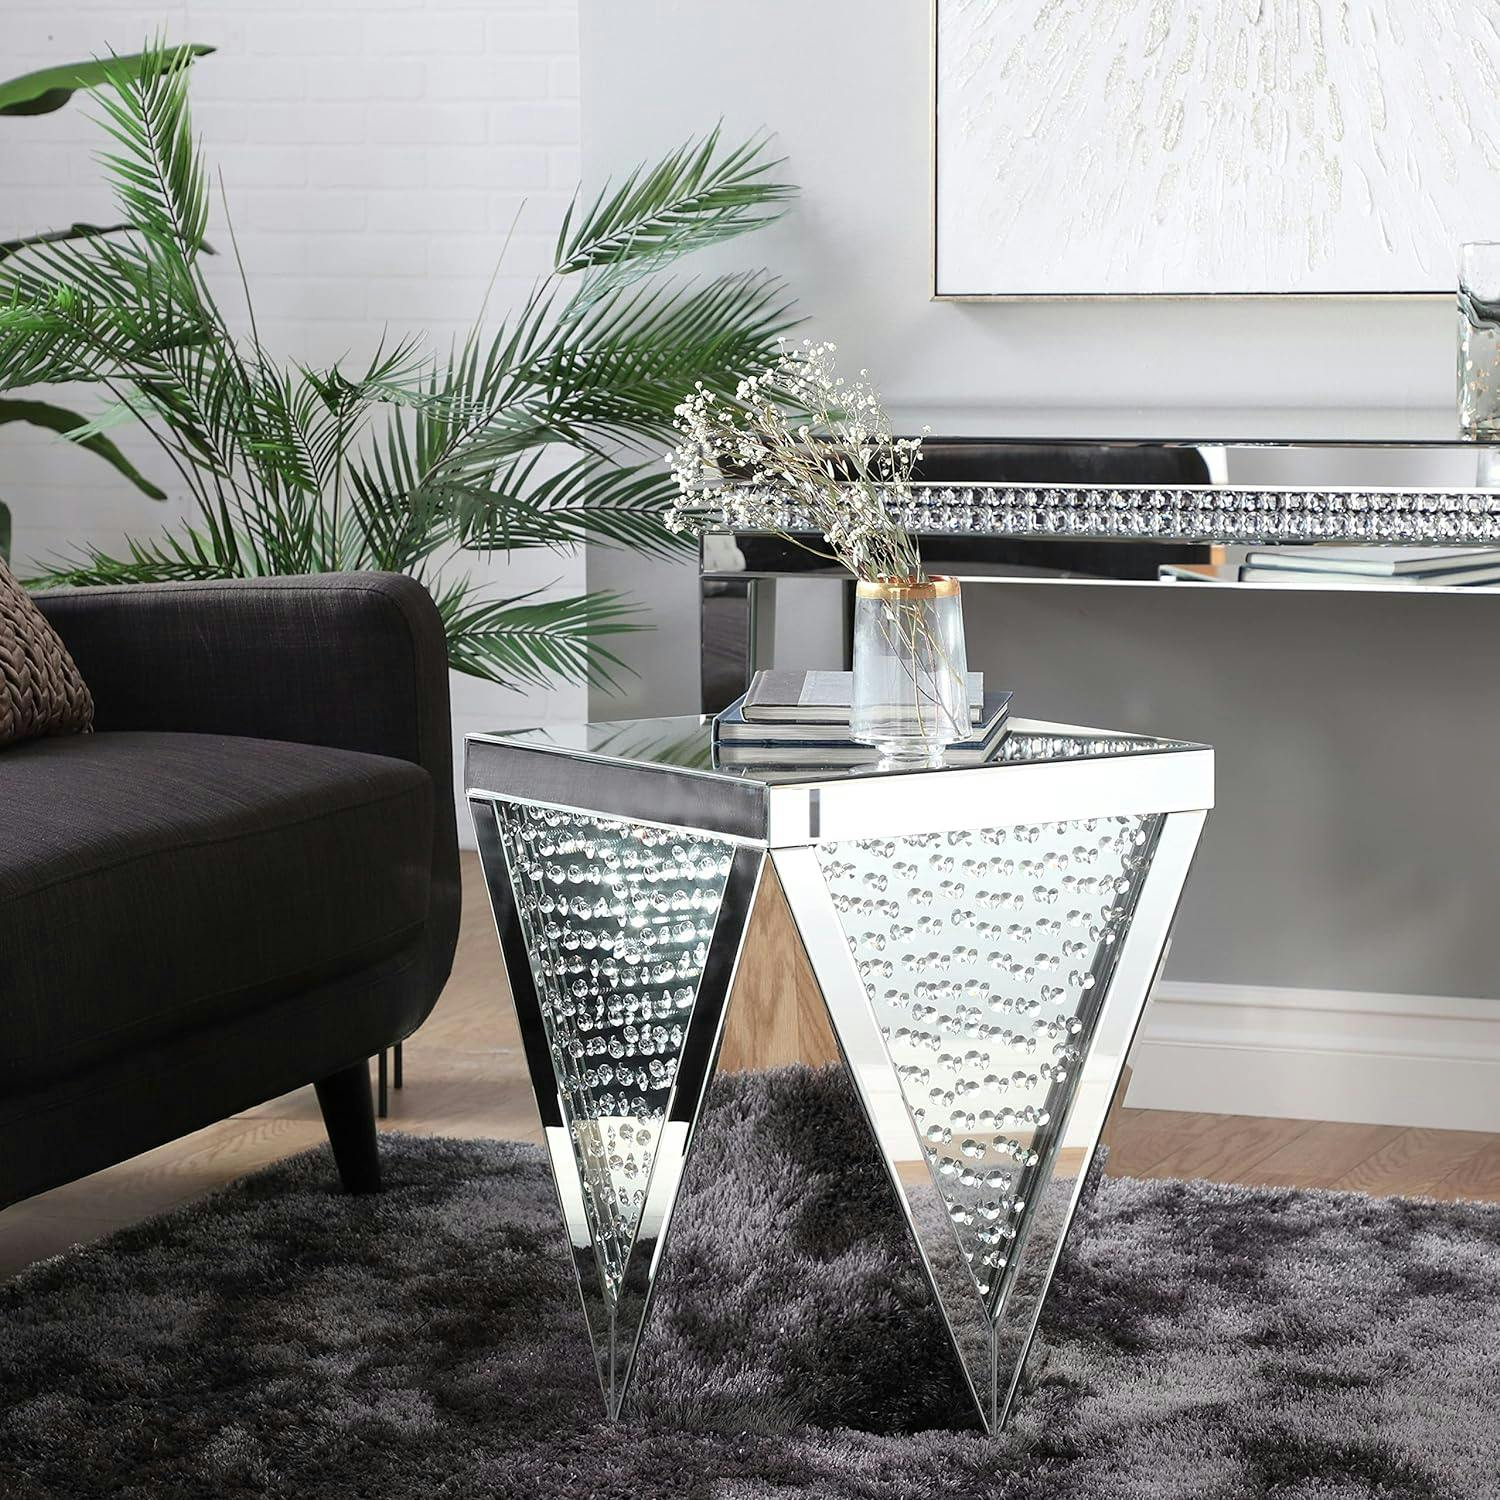 Elegant Silver Mirrored Geometric Accent Table with Crystal Accents